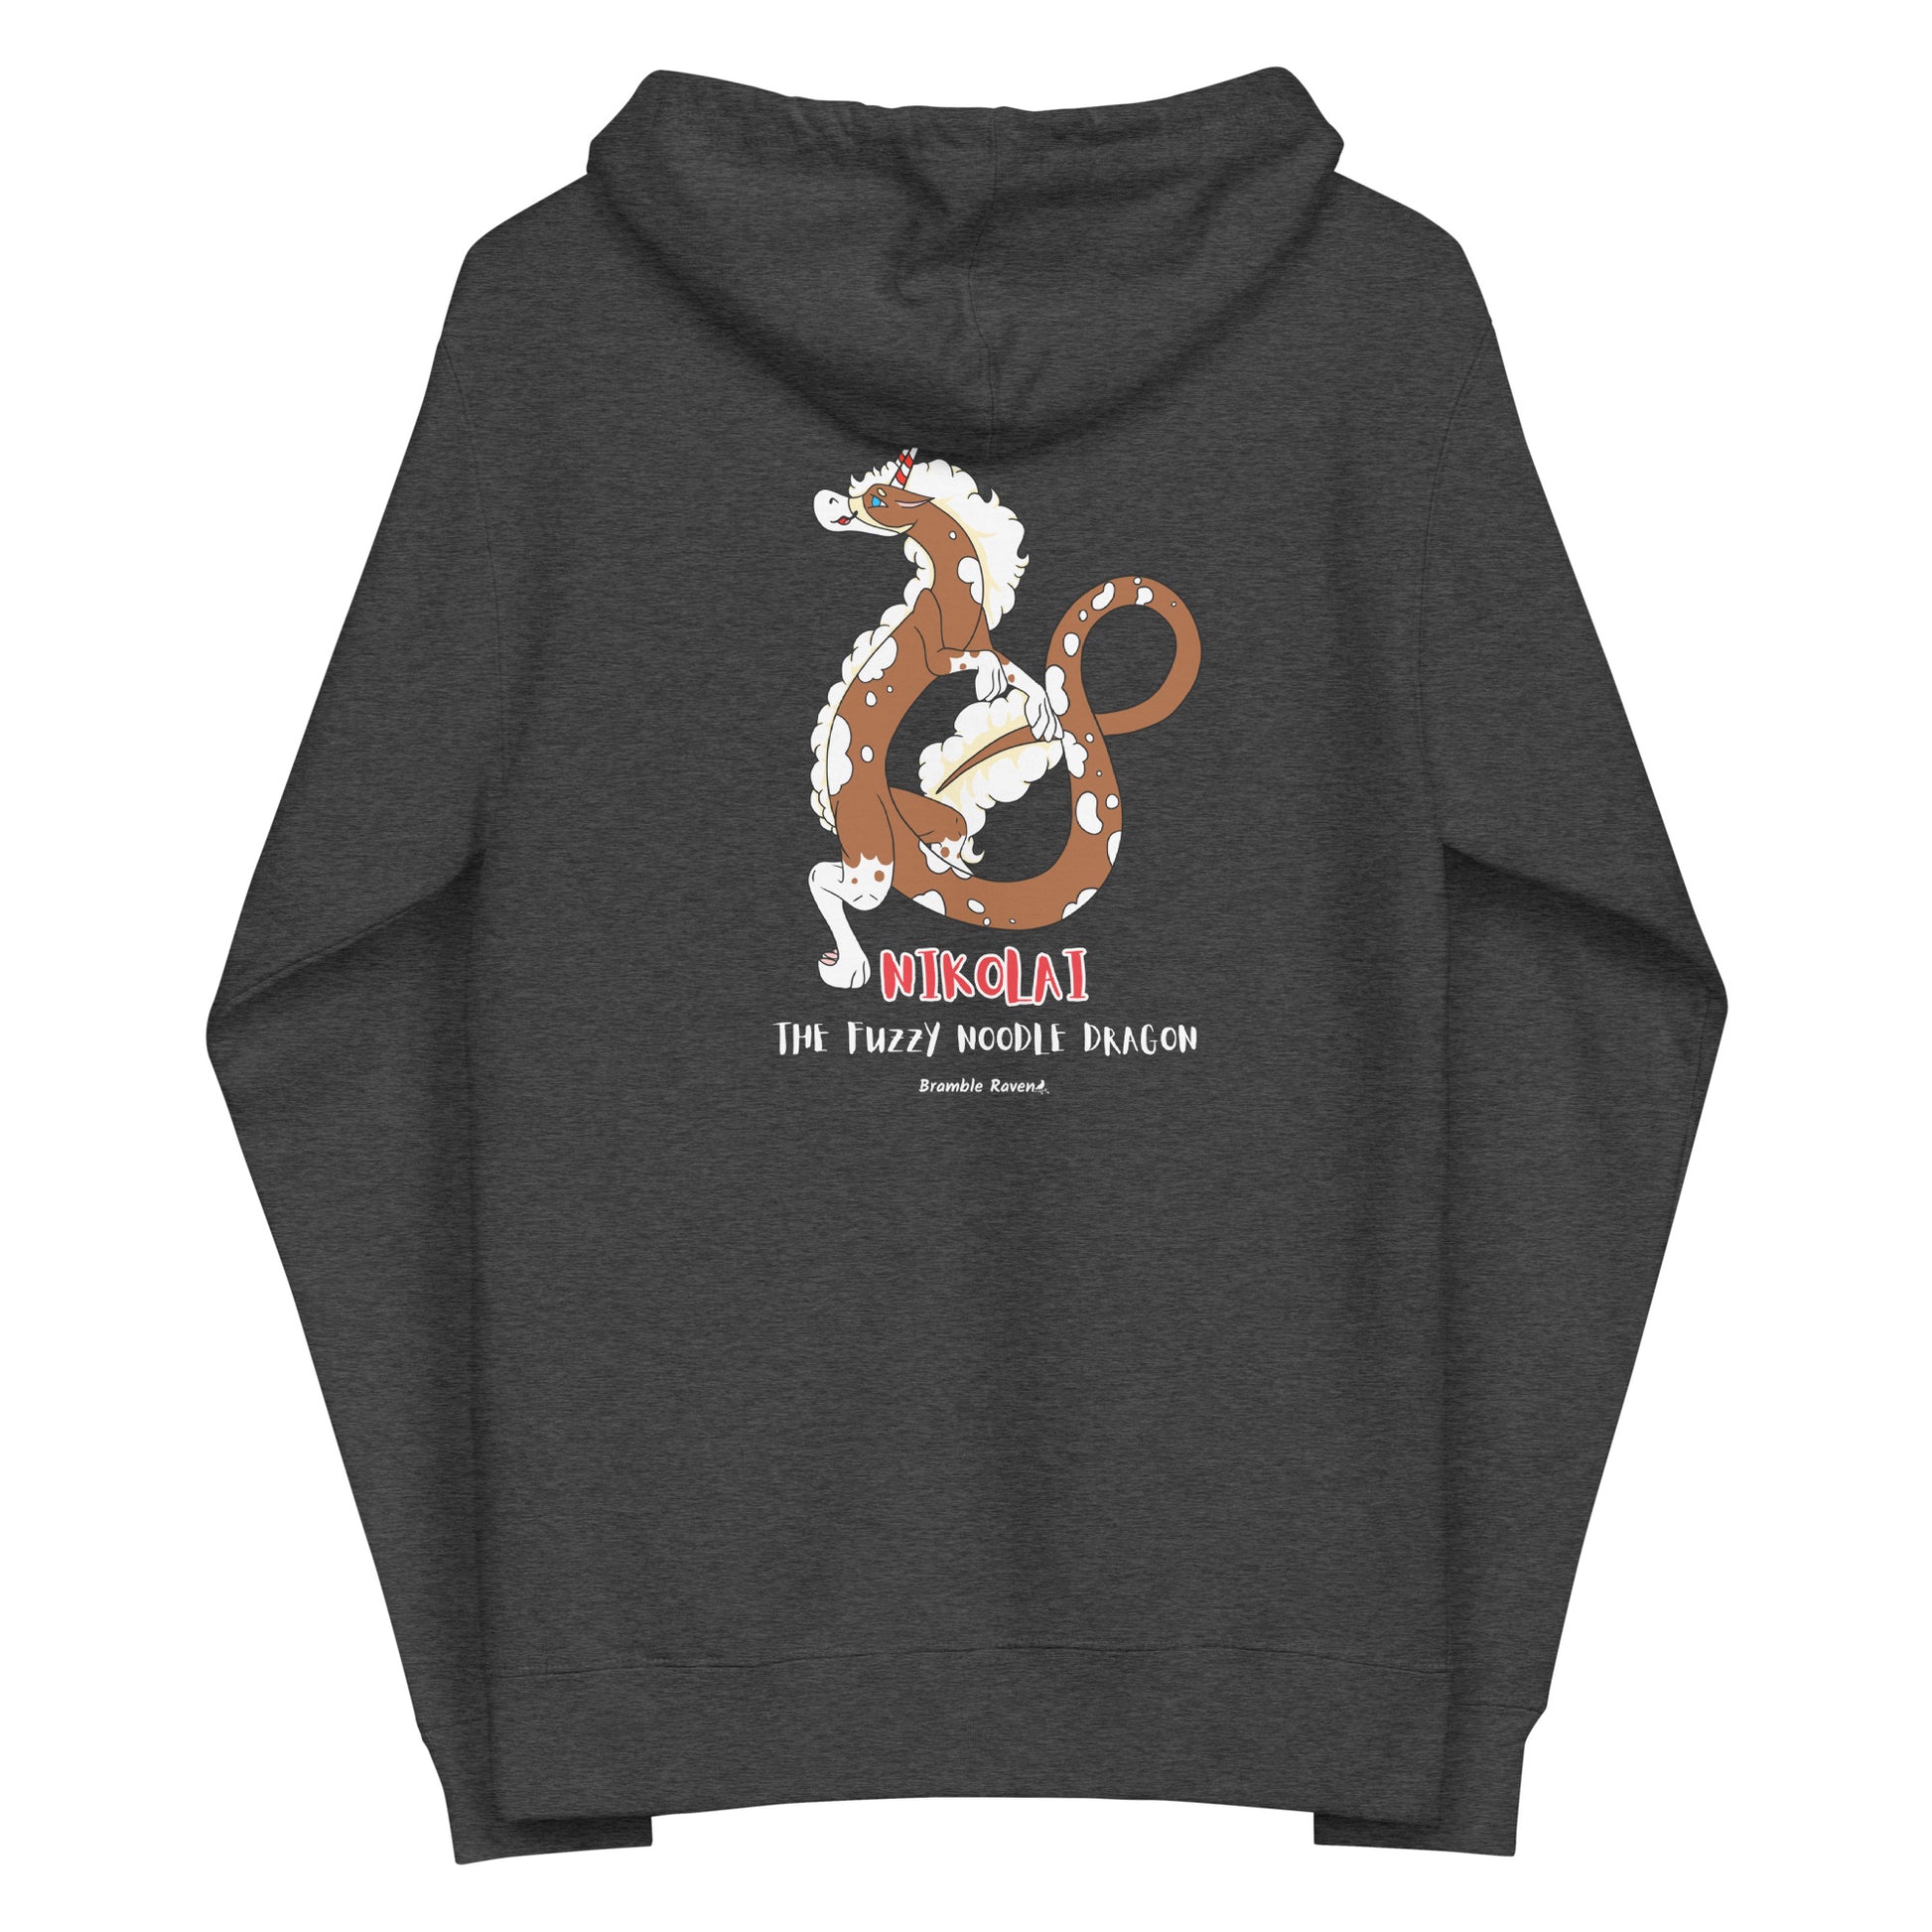 Charcoal heather colored unisex fleece zip-up hoodie. Features a back design of Nikolai the root beer float fuzzy noodle dragon.